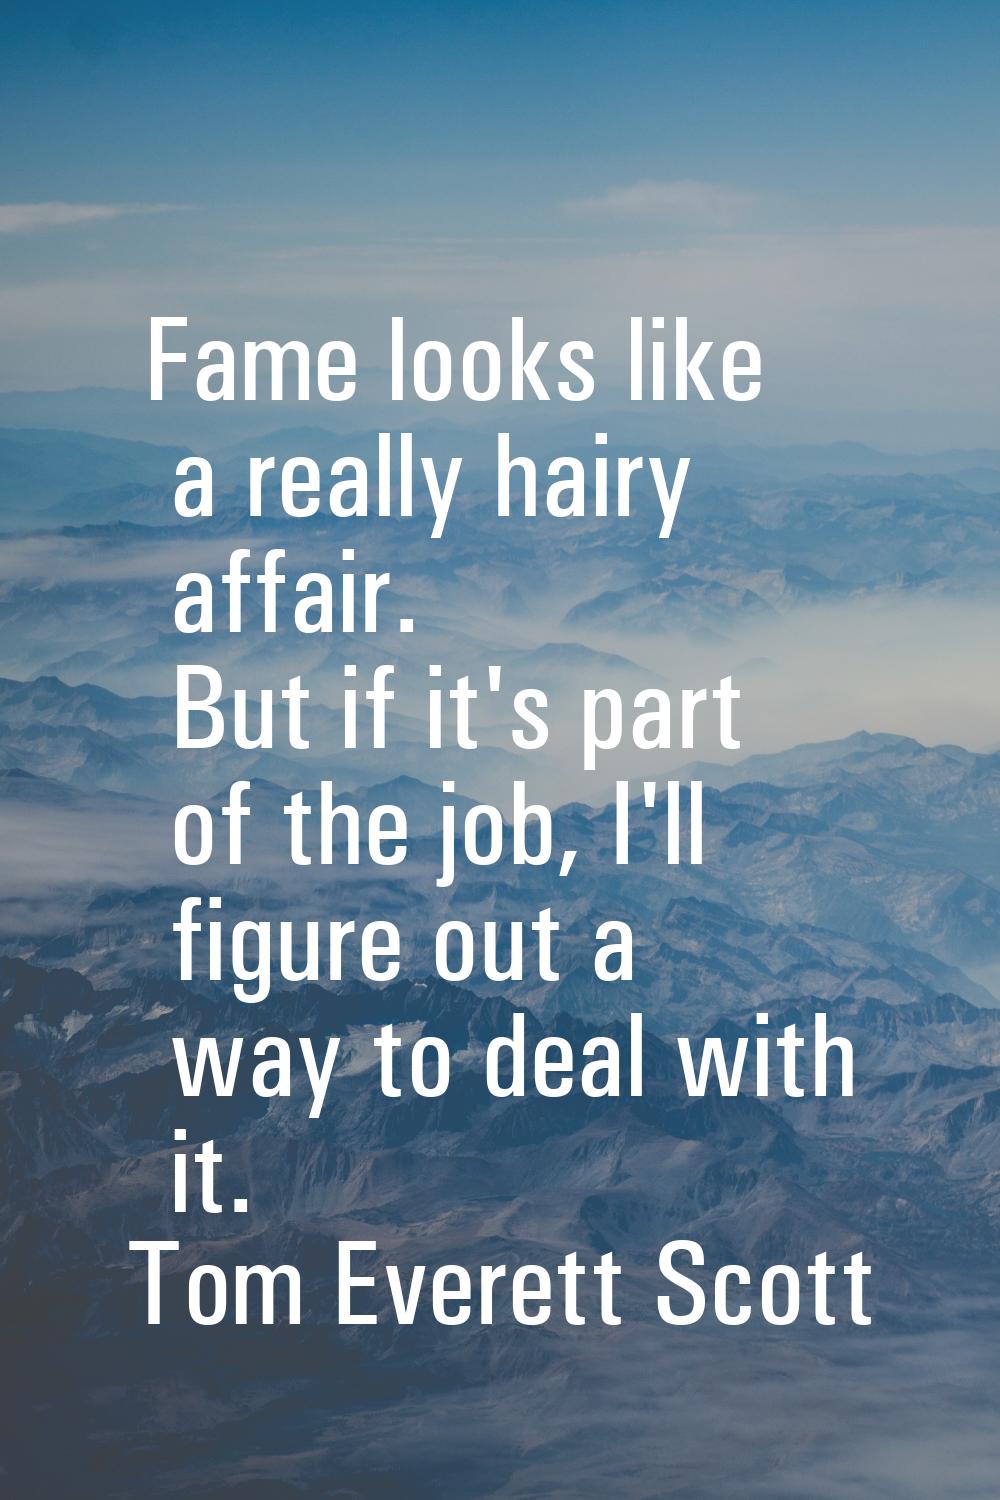 Fame looks like a really hairy affair. But if it's part of the job, I'll figure out a way to deal w